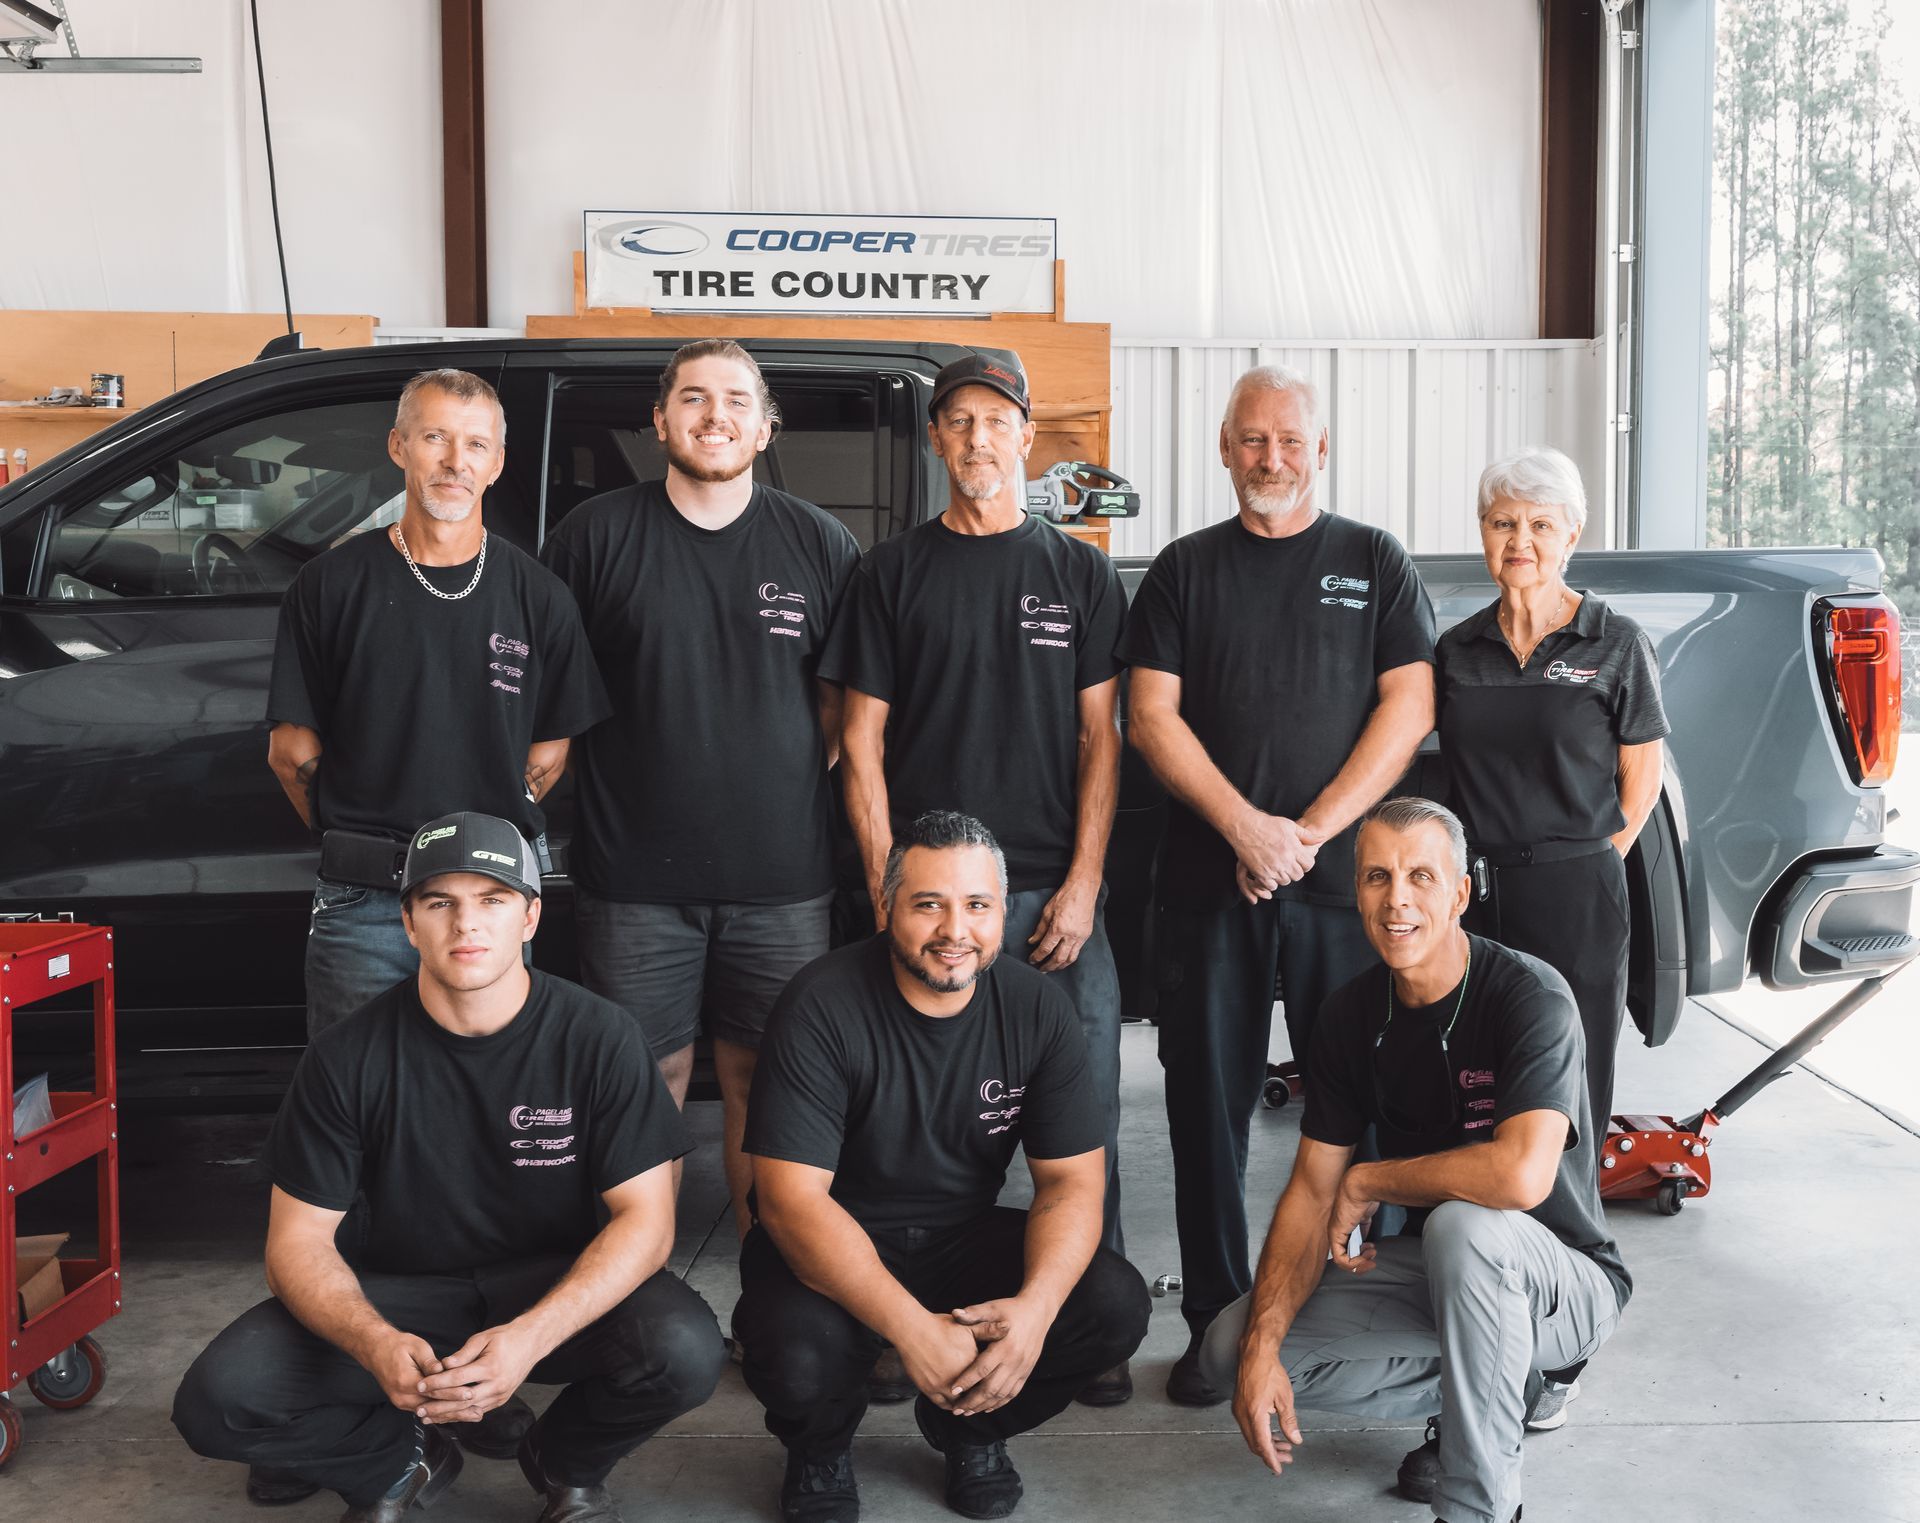 The crew at Tire Country in Pageland, SC